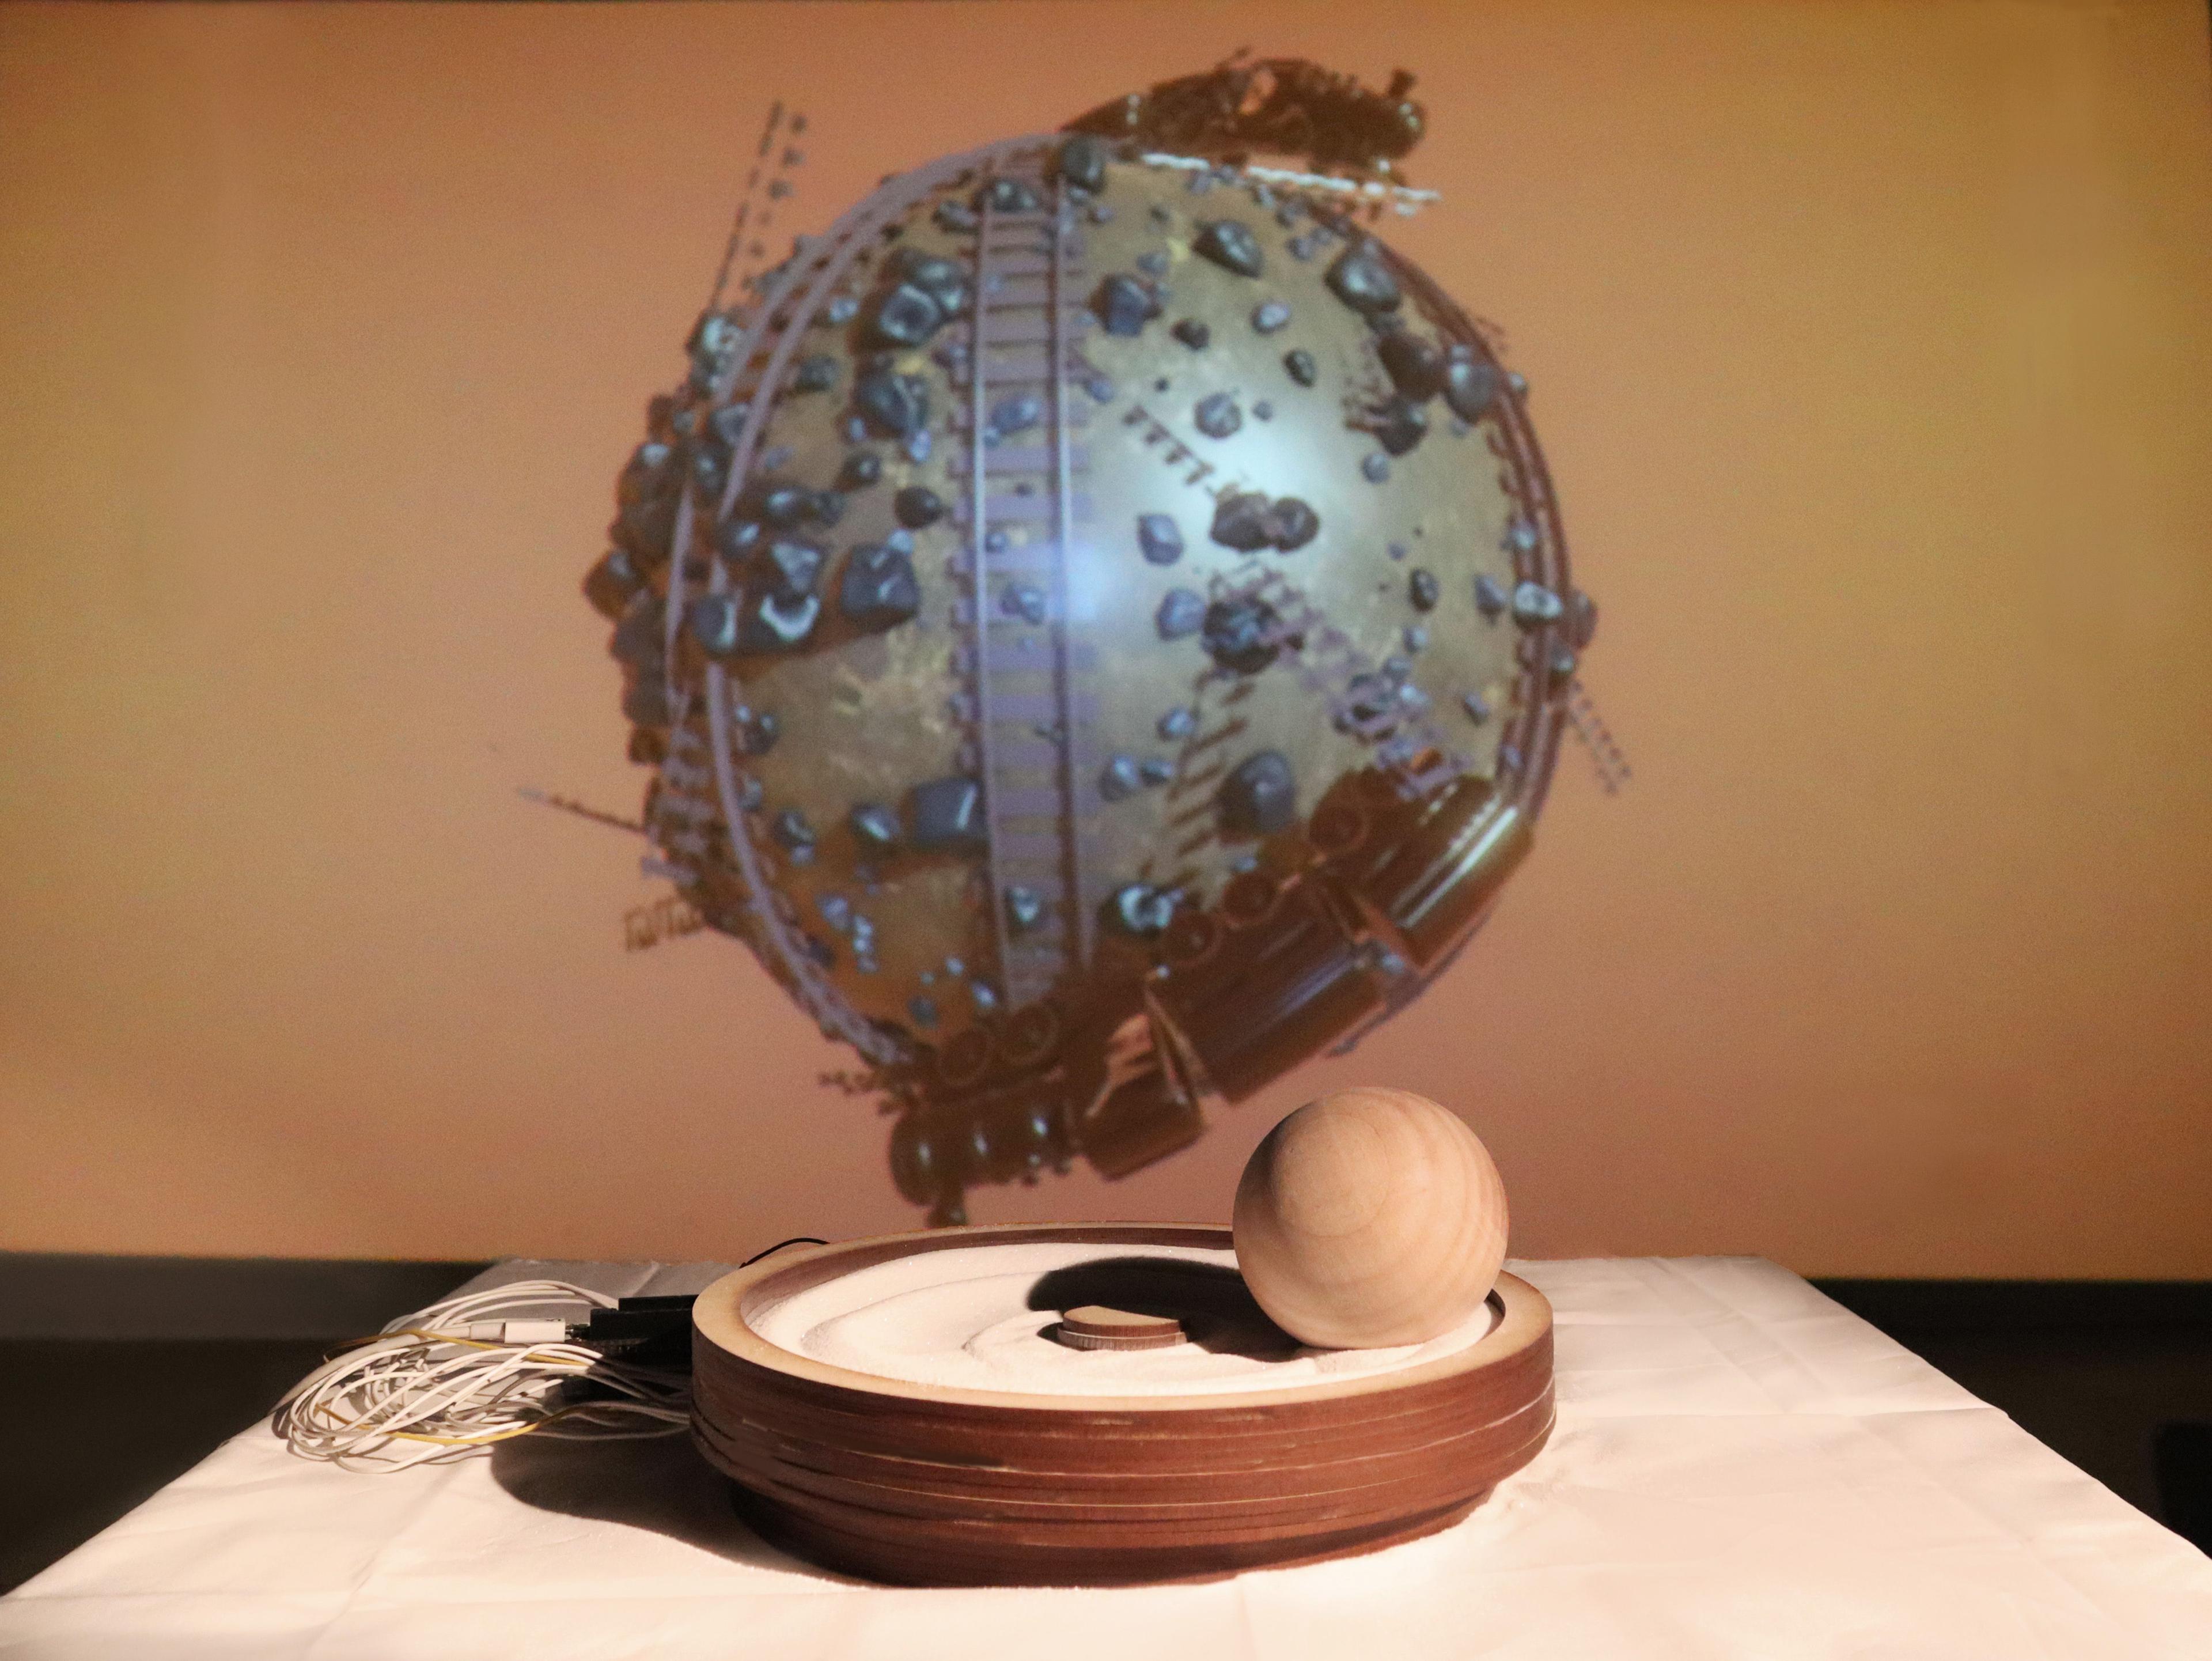 A projection screen with a 3d model of a small round planet. In the foreground there is a wooden vessel filled with sand. In the sand is a wooden ball.